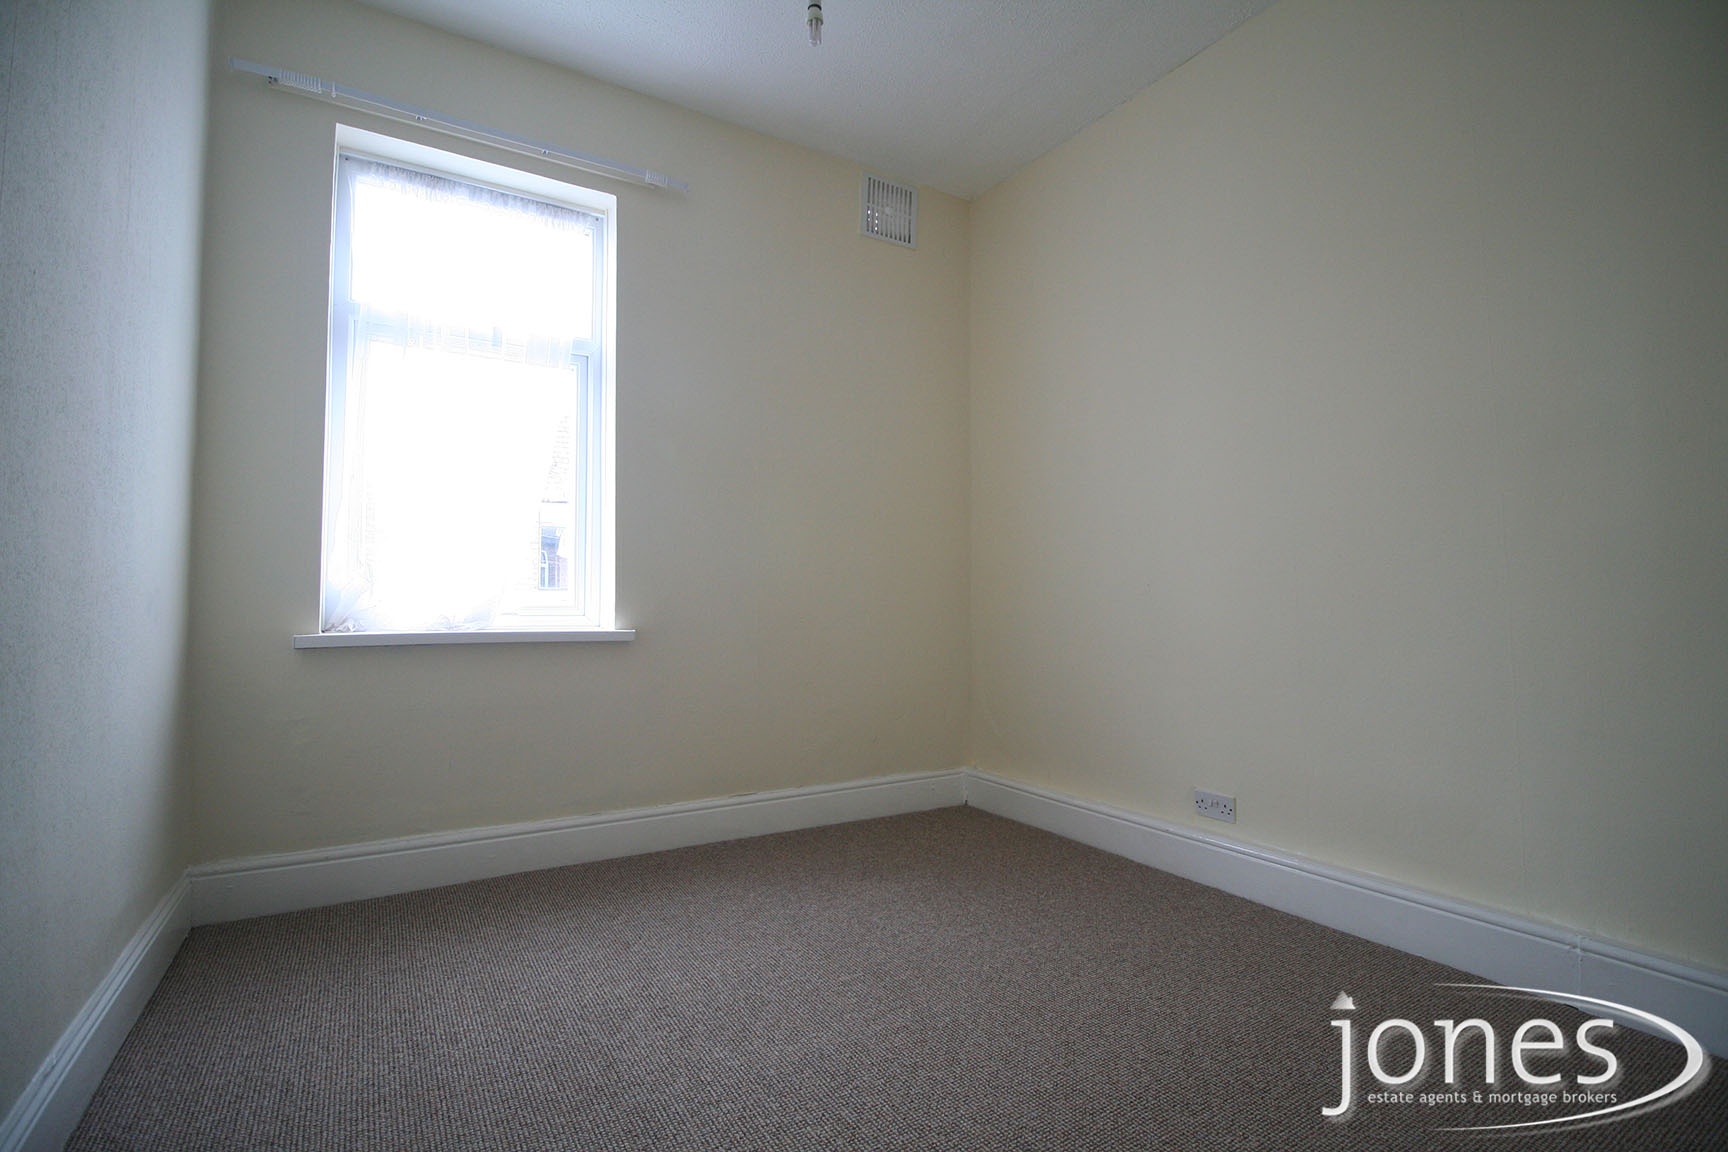 Home for Sale Let - Photo 07 Victoria Road, Thornaby, TS17 6HH